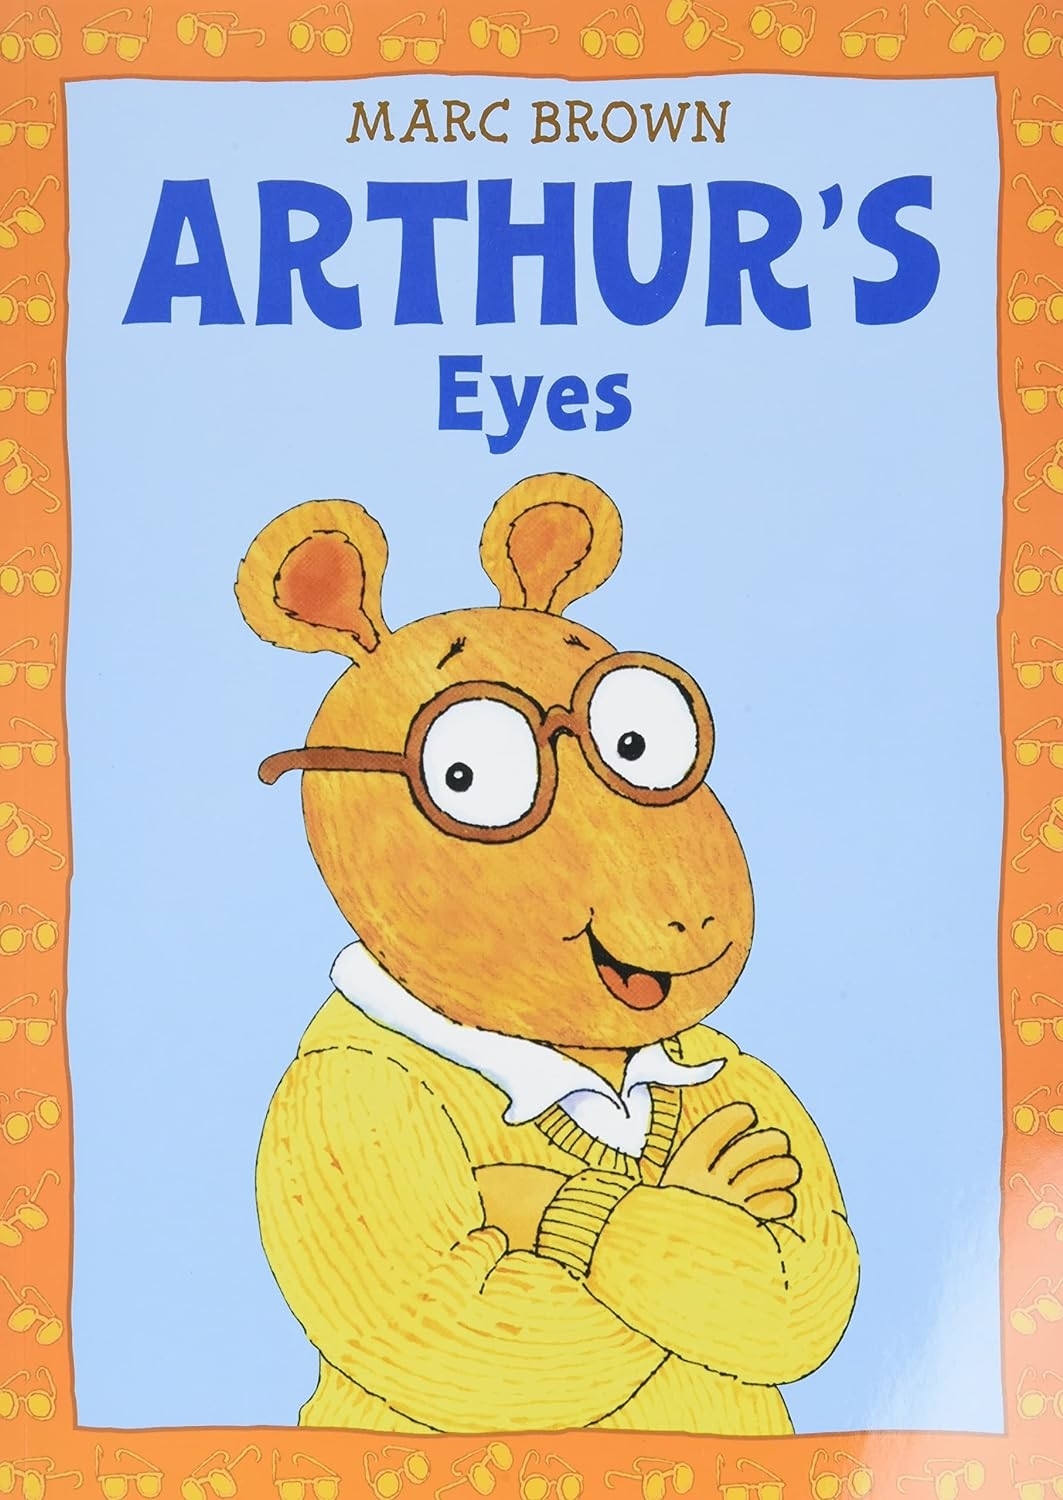 Cover of &quot;Arthur&#x27;s Eyes&quot; book by Marc Brown featuring Arthur the aardvark